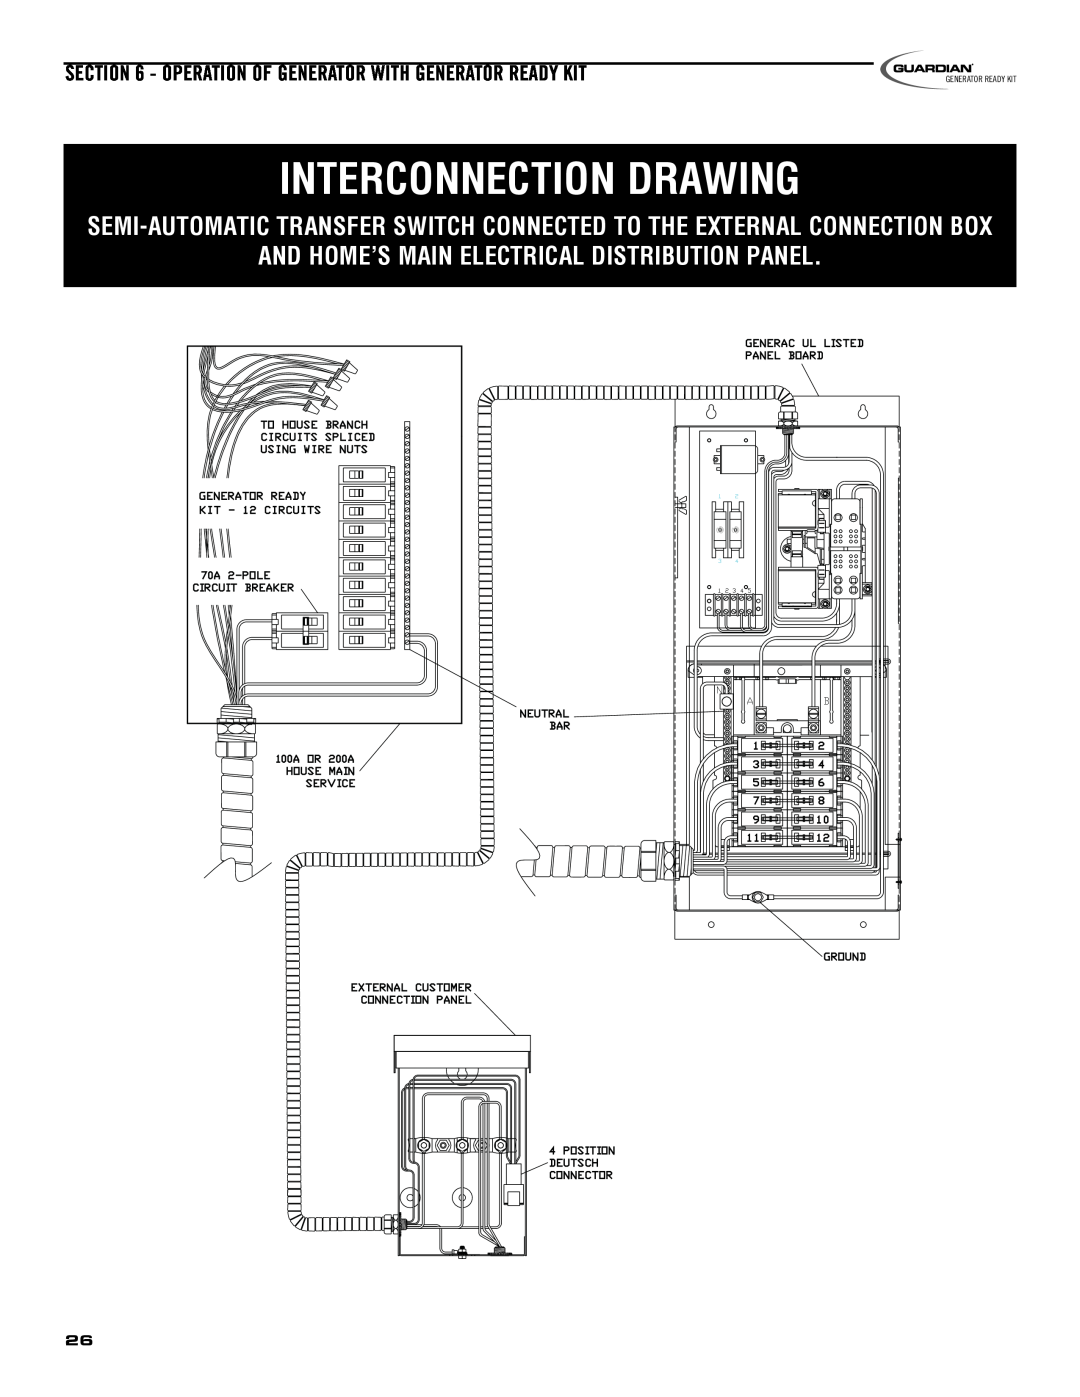 Guardian Technologies 5209 owner manual And Home’S Main Electrical Distribution Panel, Interconnection Drawing 